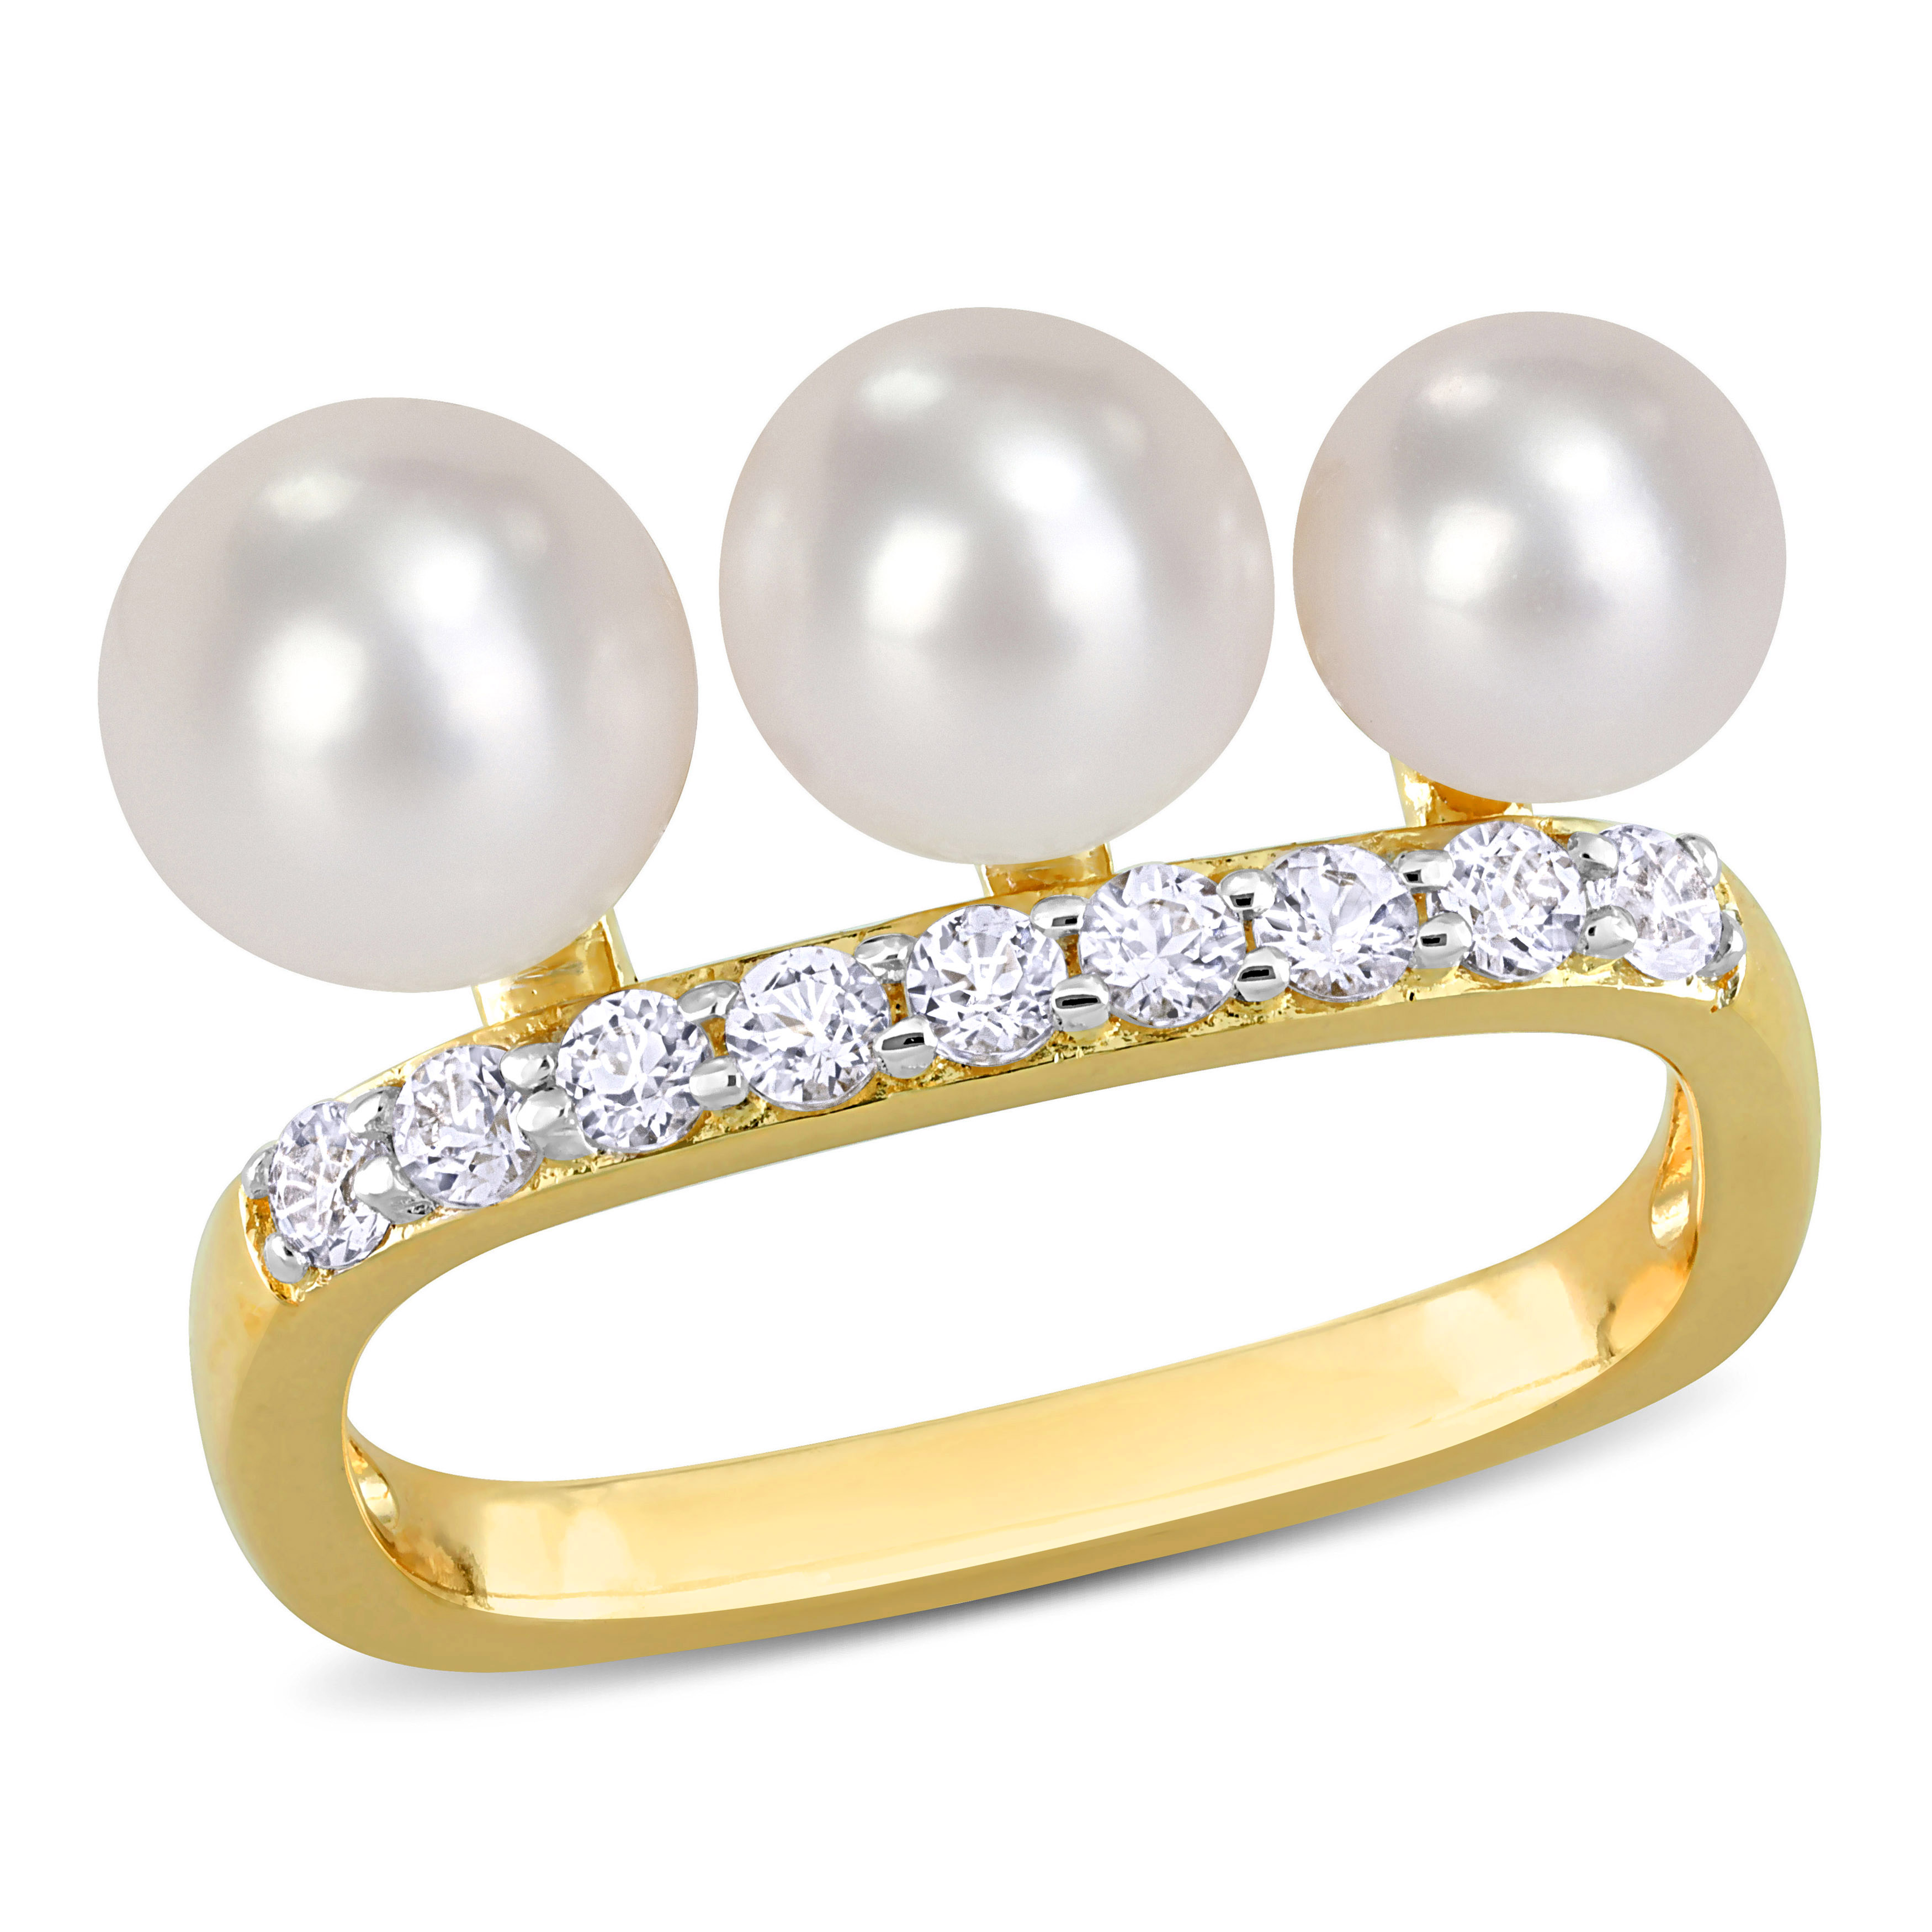 Freshwater Cultured Pearl & 3/8 CT TGW White Topaz Ring in Yellow Plated Sterling Silver